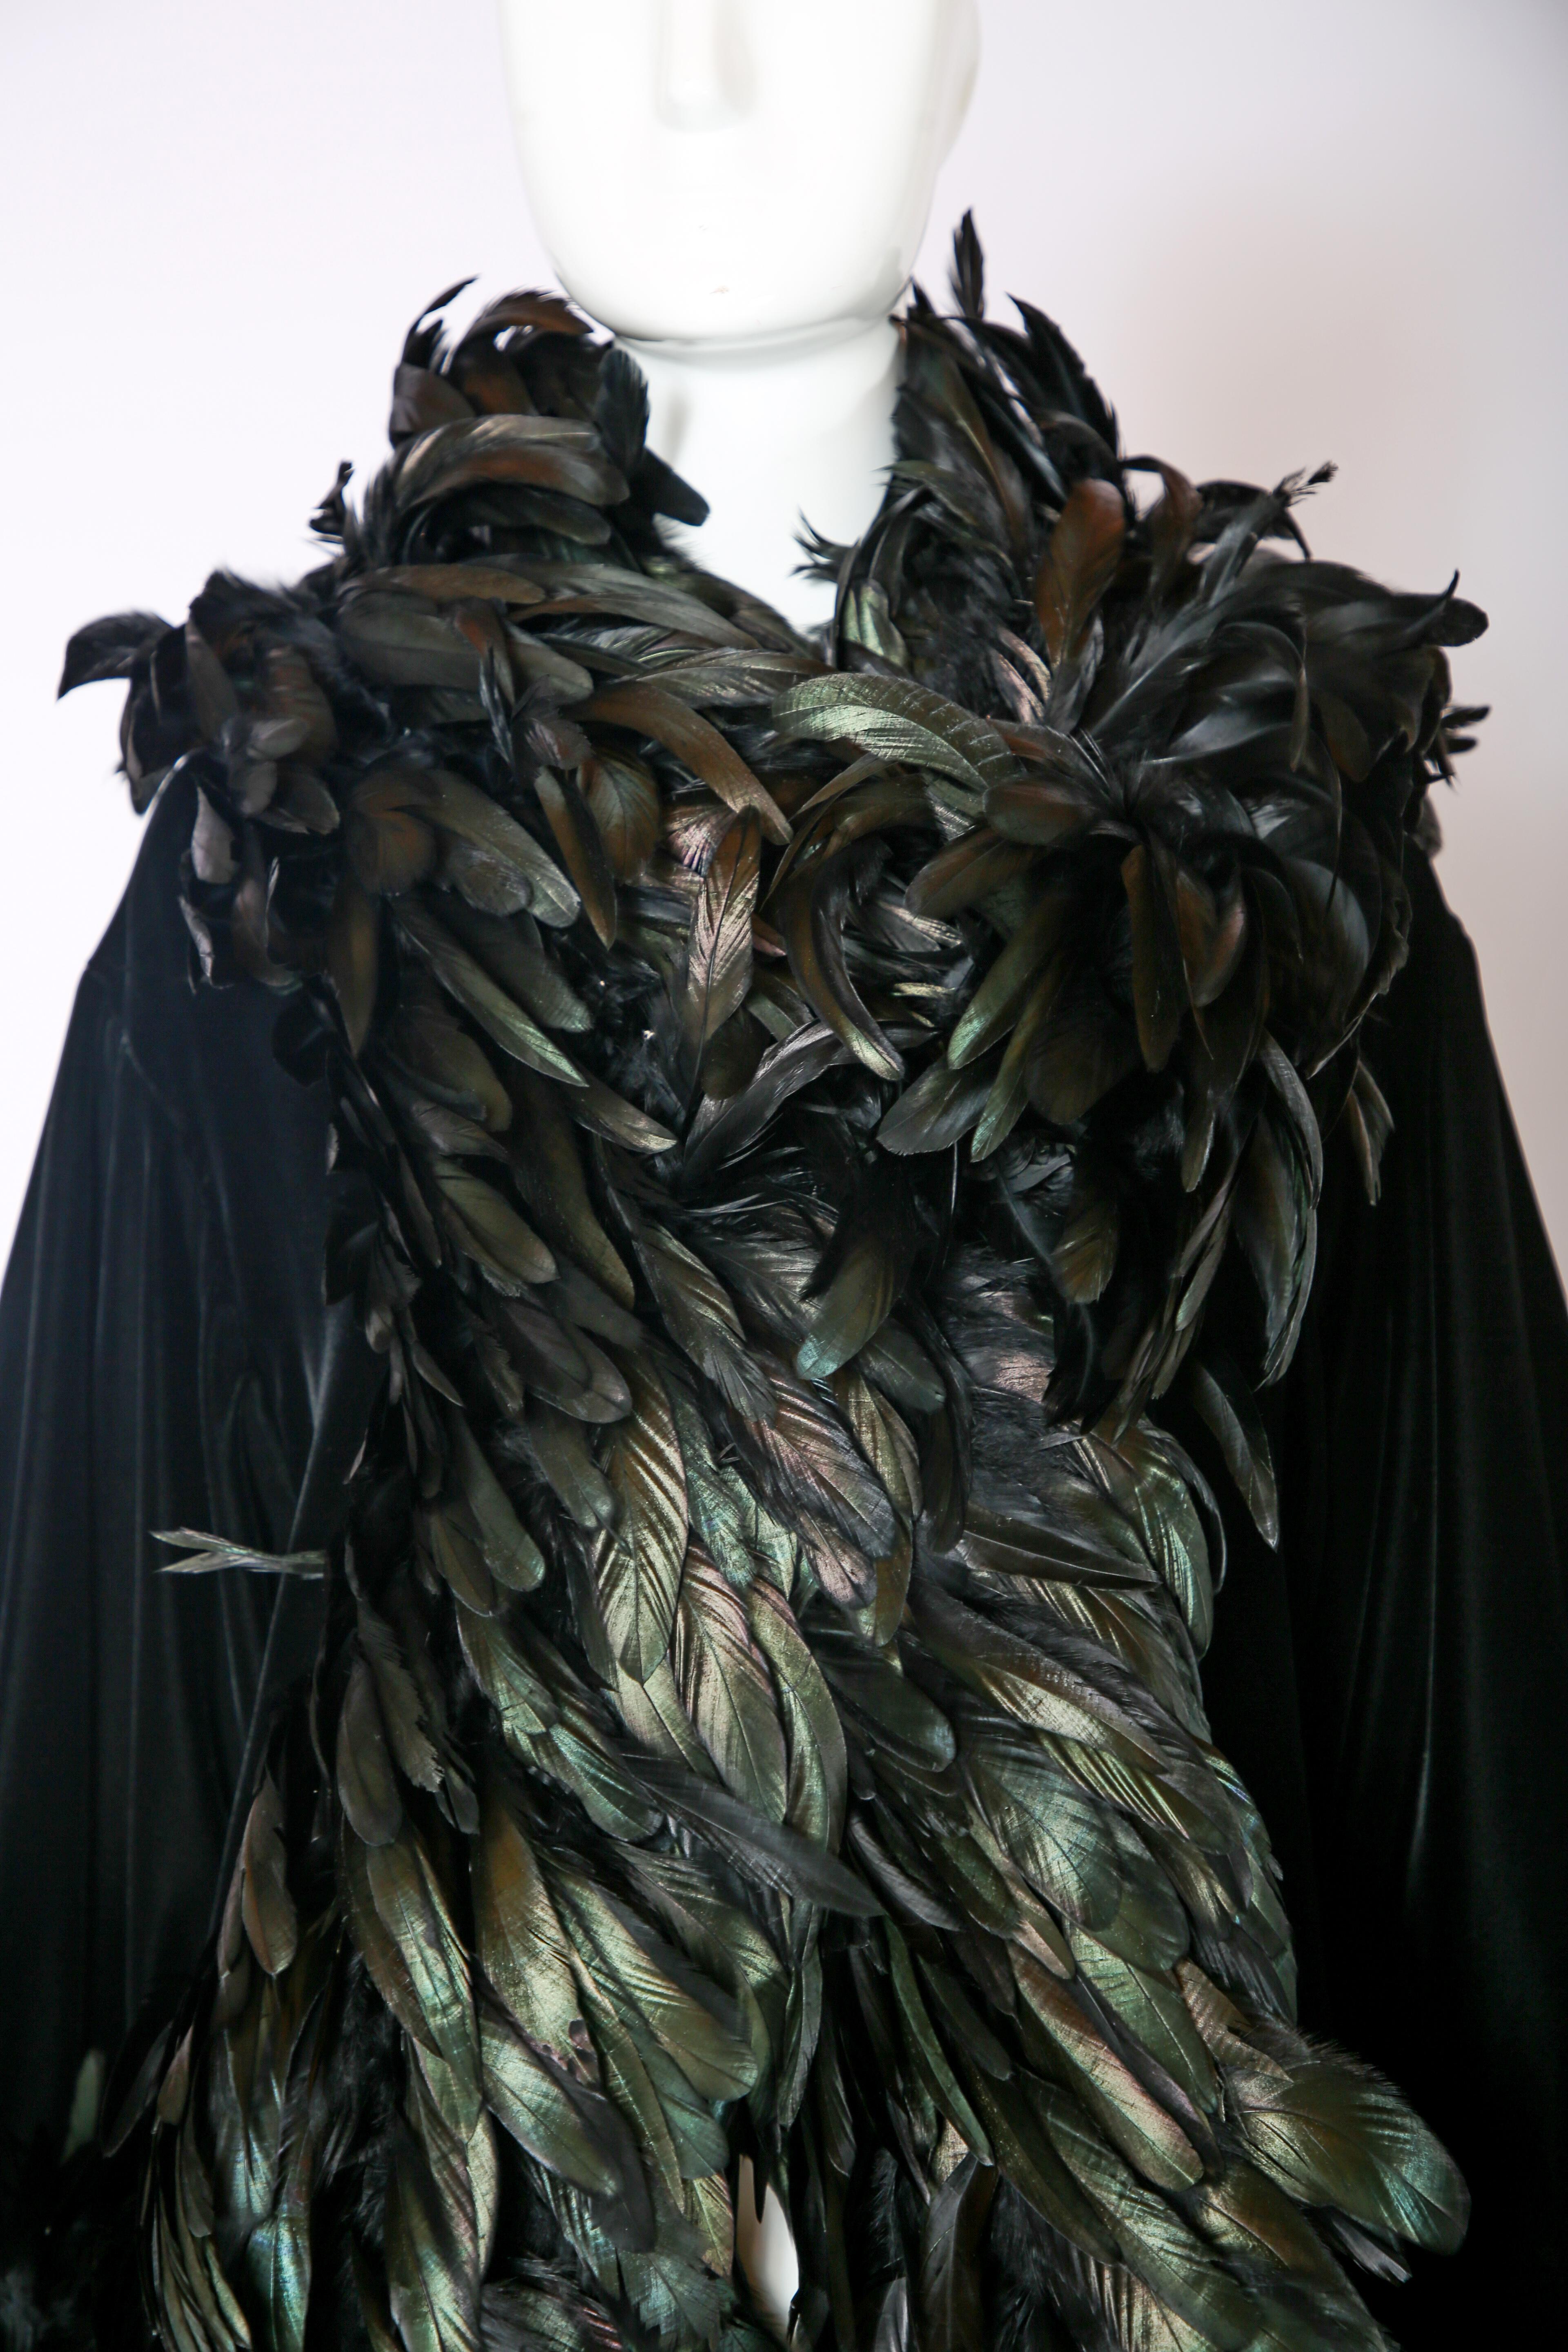 Bob Mackie black velvet coat with black feather trim w/an undertone of green iridescence. There is a hidden hook closure at center front. In very good condition with some scattered and missing feathers. Size 8.

Sleeves: 19” to end of feathers
Bust: